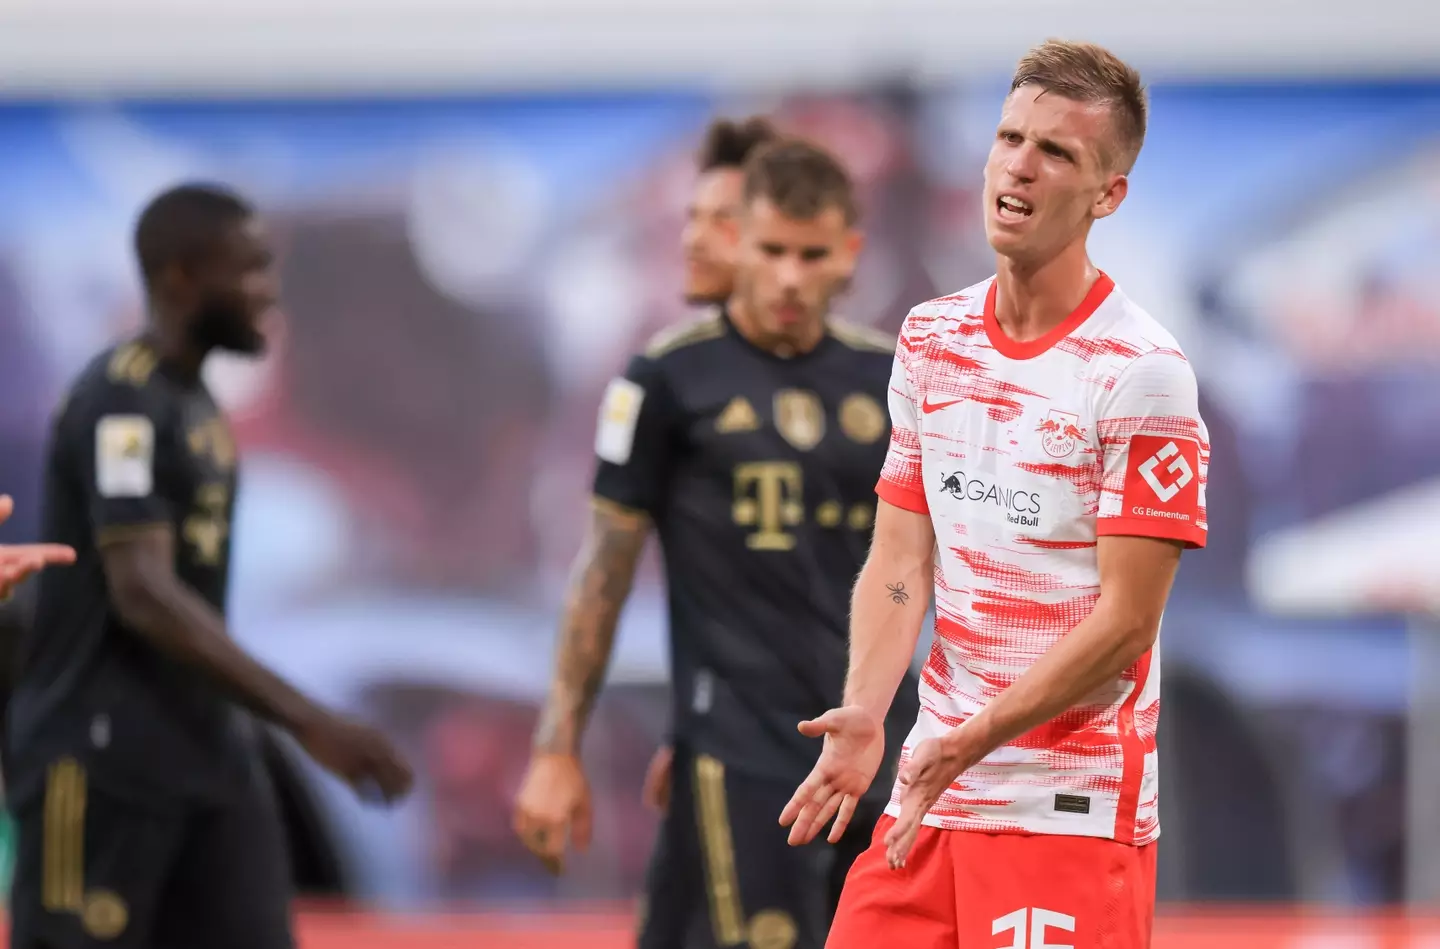 Bayern have already beaten potential title rivals RB Leipzig 4-1 away this season, after Leipzig lost their manager, best defender and captain to Bayern in the summer. Image: PA Images